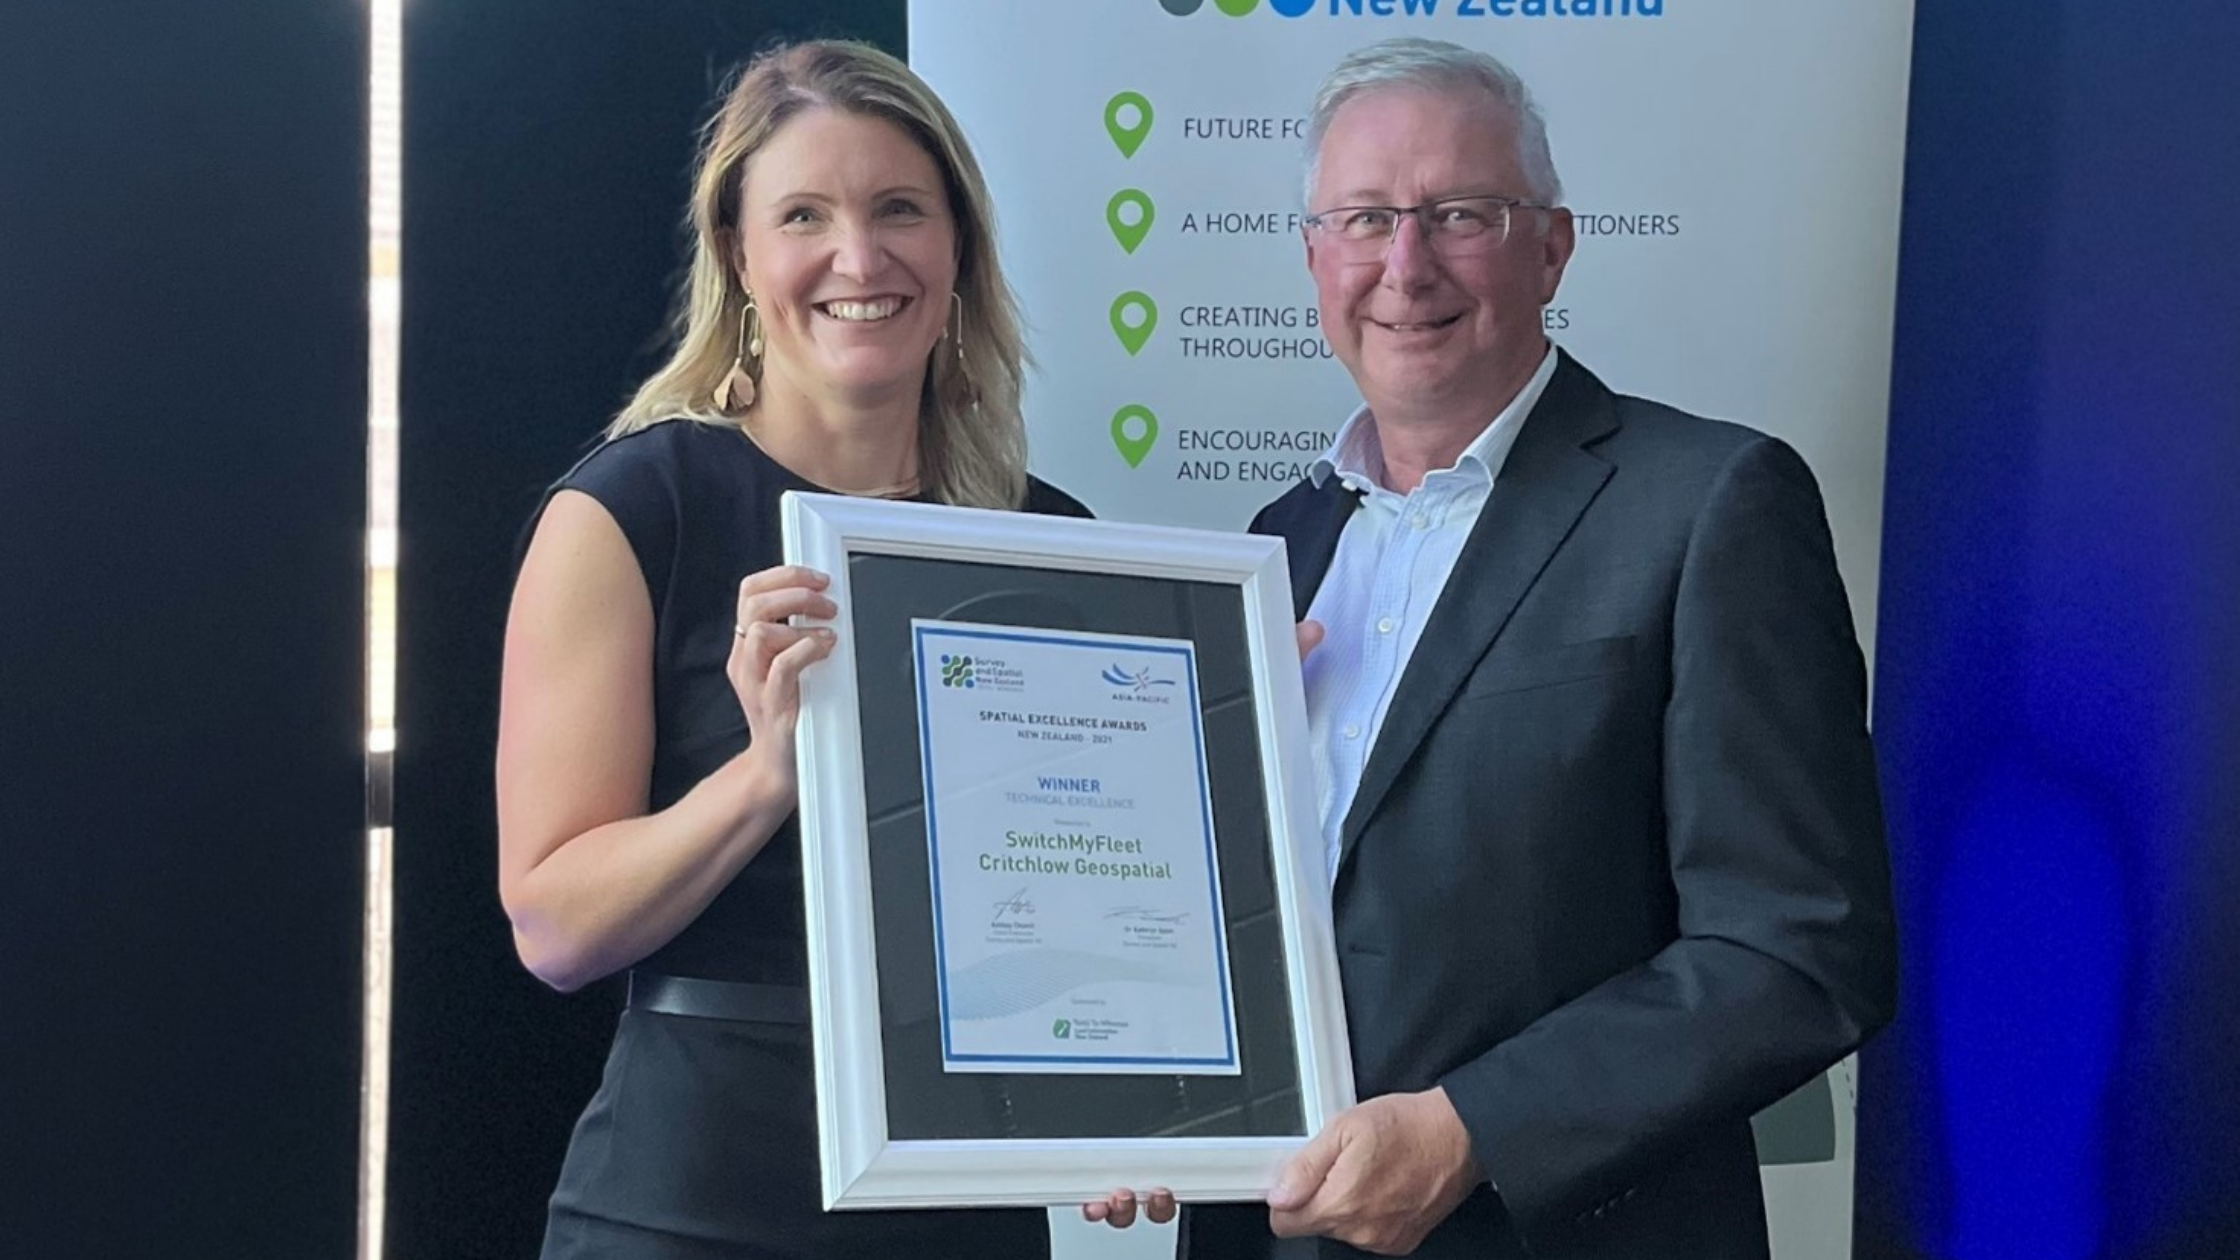 Critchlow Geospatial takes out Technical Excellence honours at the 2021 Spatial Excellence Awards for its SwitchMyFleet solution